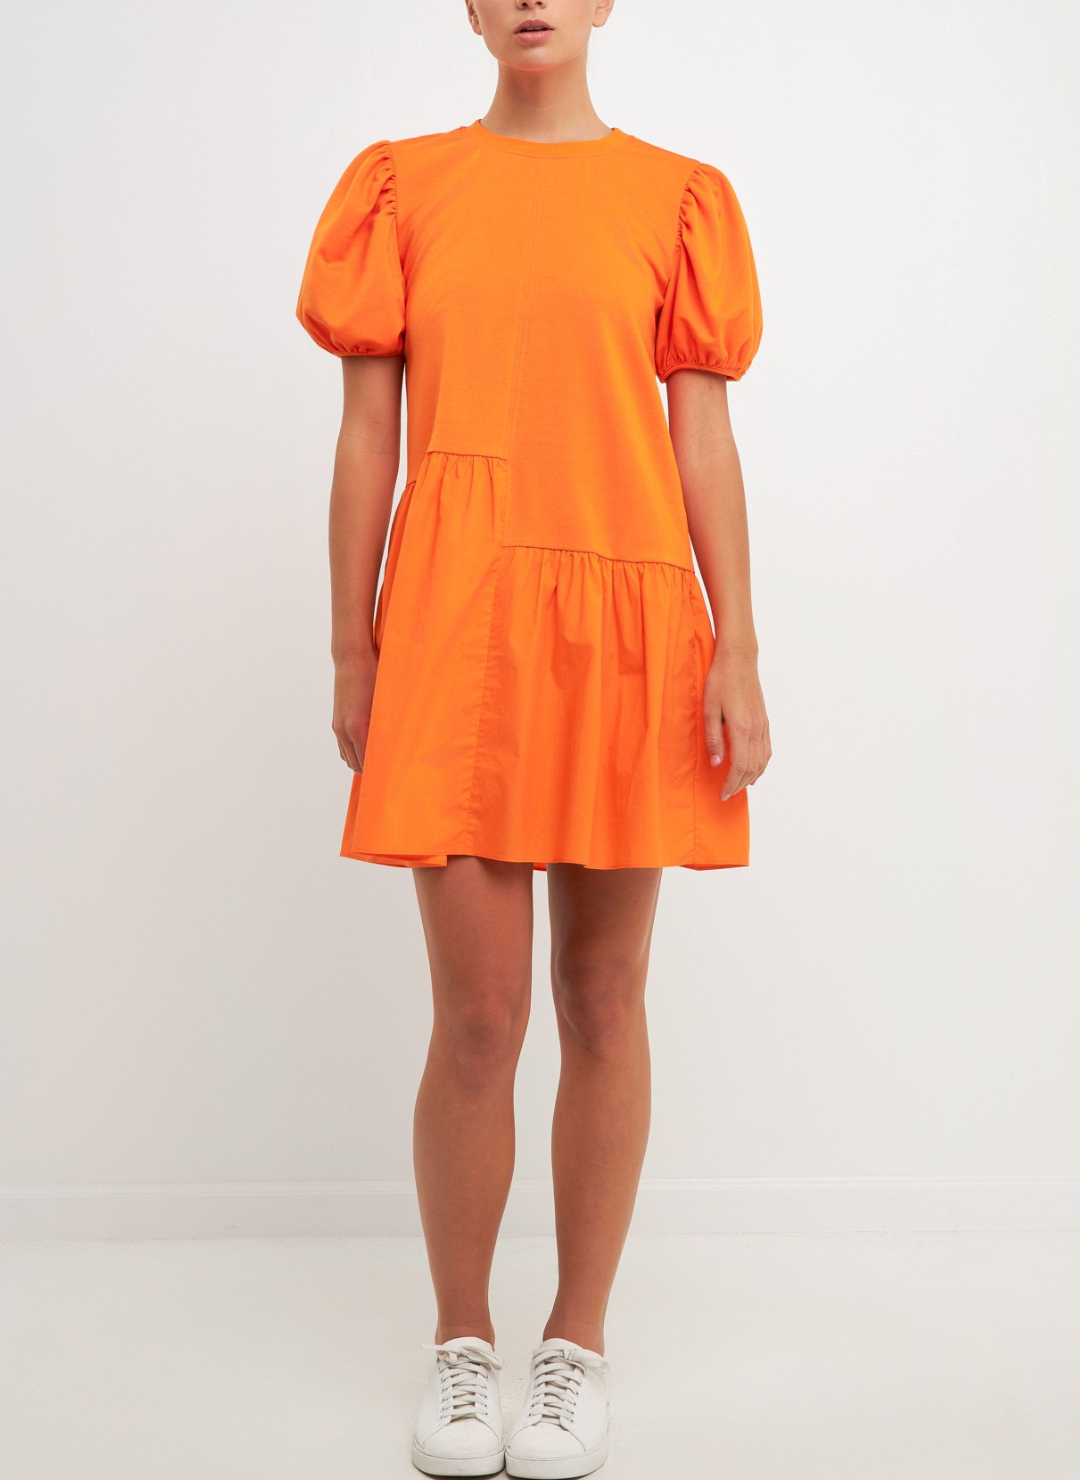 Full body view of model wearing Orangesicle Delight Dress with short puffy sleeves, knit bodice, cotton poplin skirt, and uneven front seam at the waist. White background.